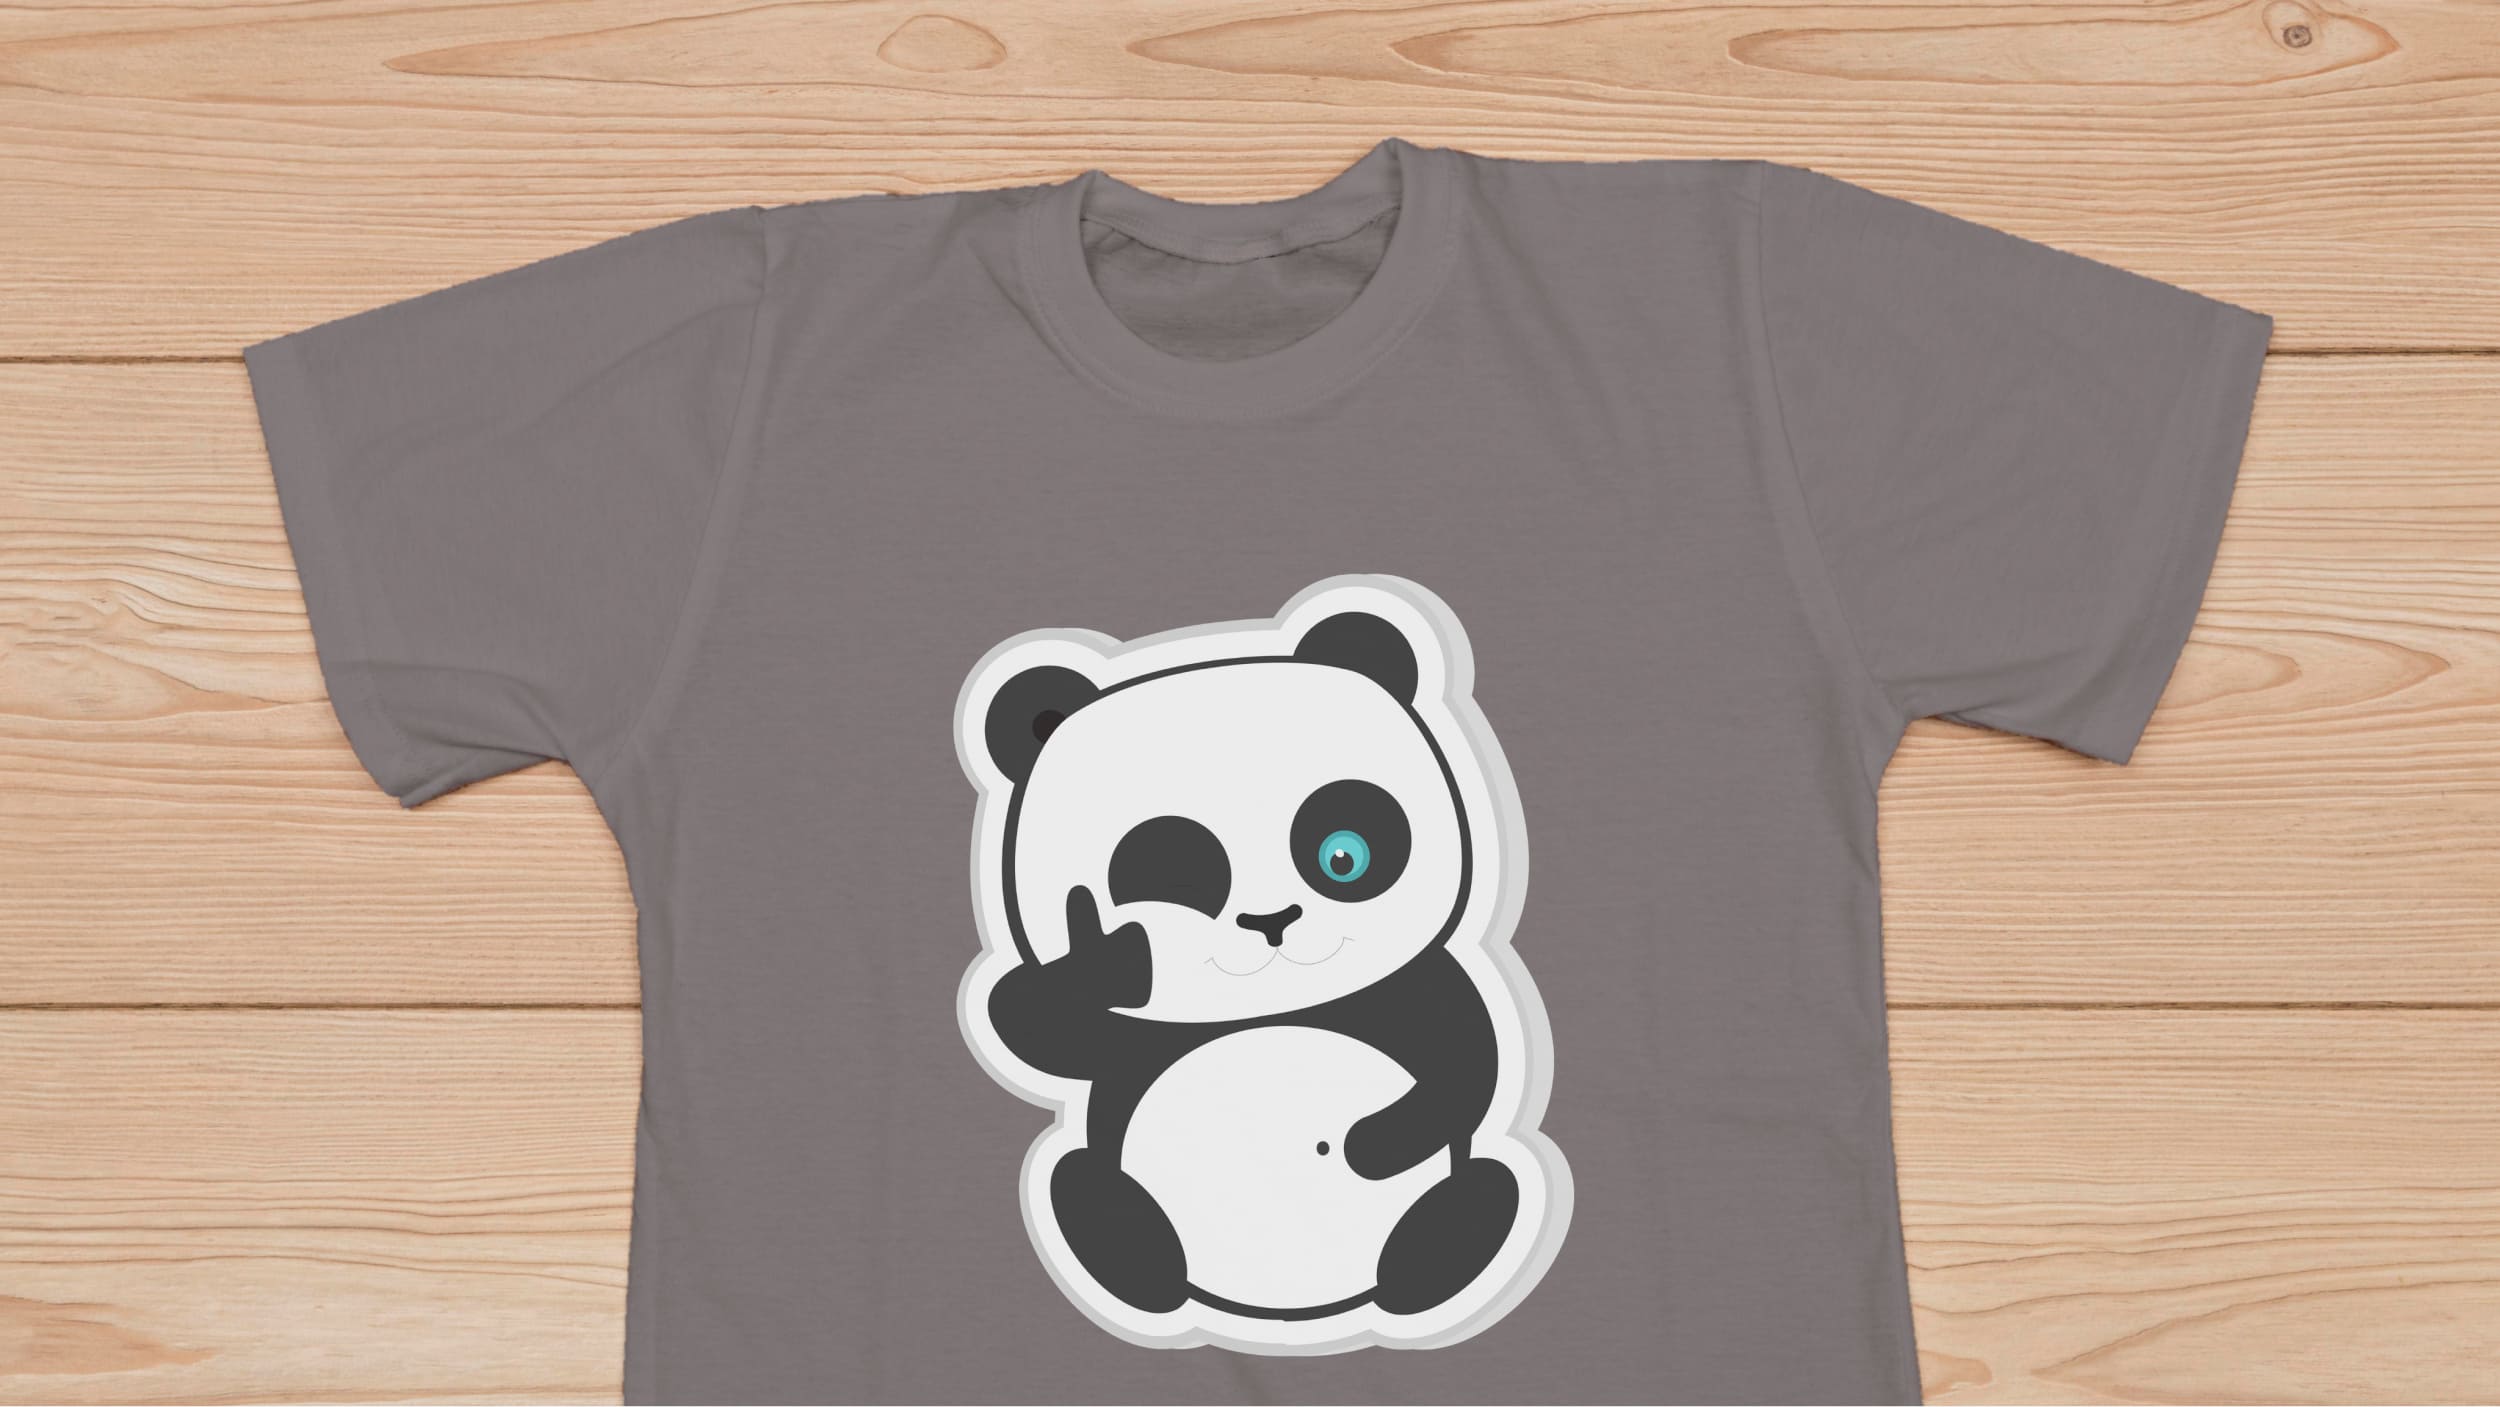 Gray t-shirt with smiling panda bear on a wooden background.